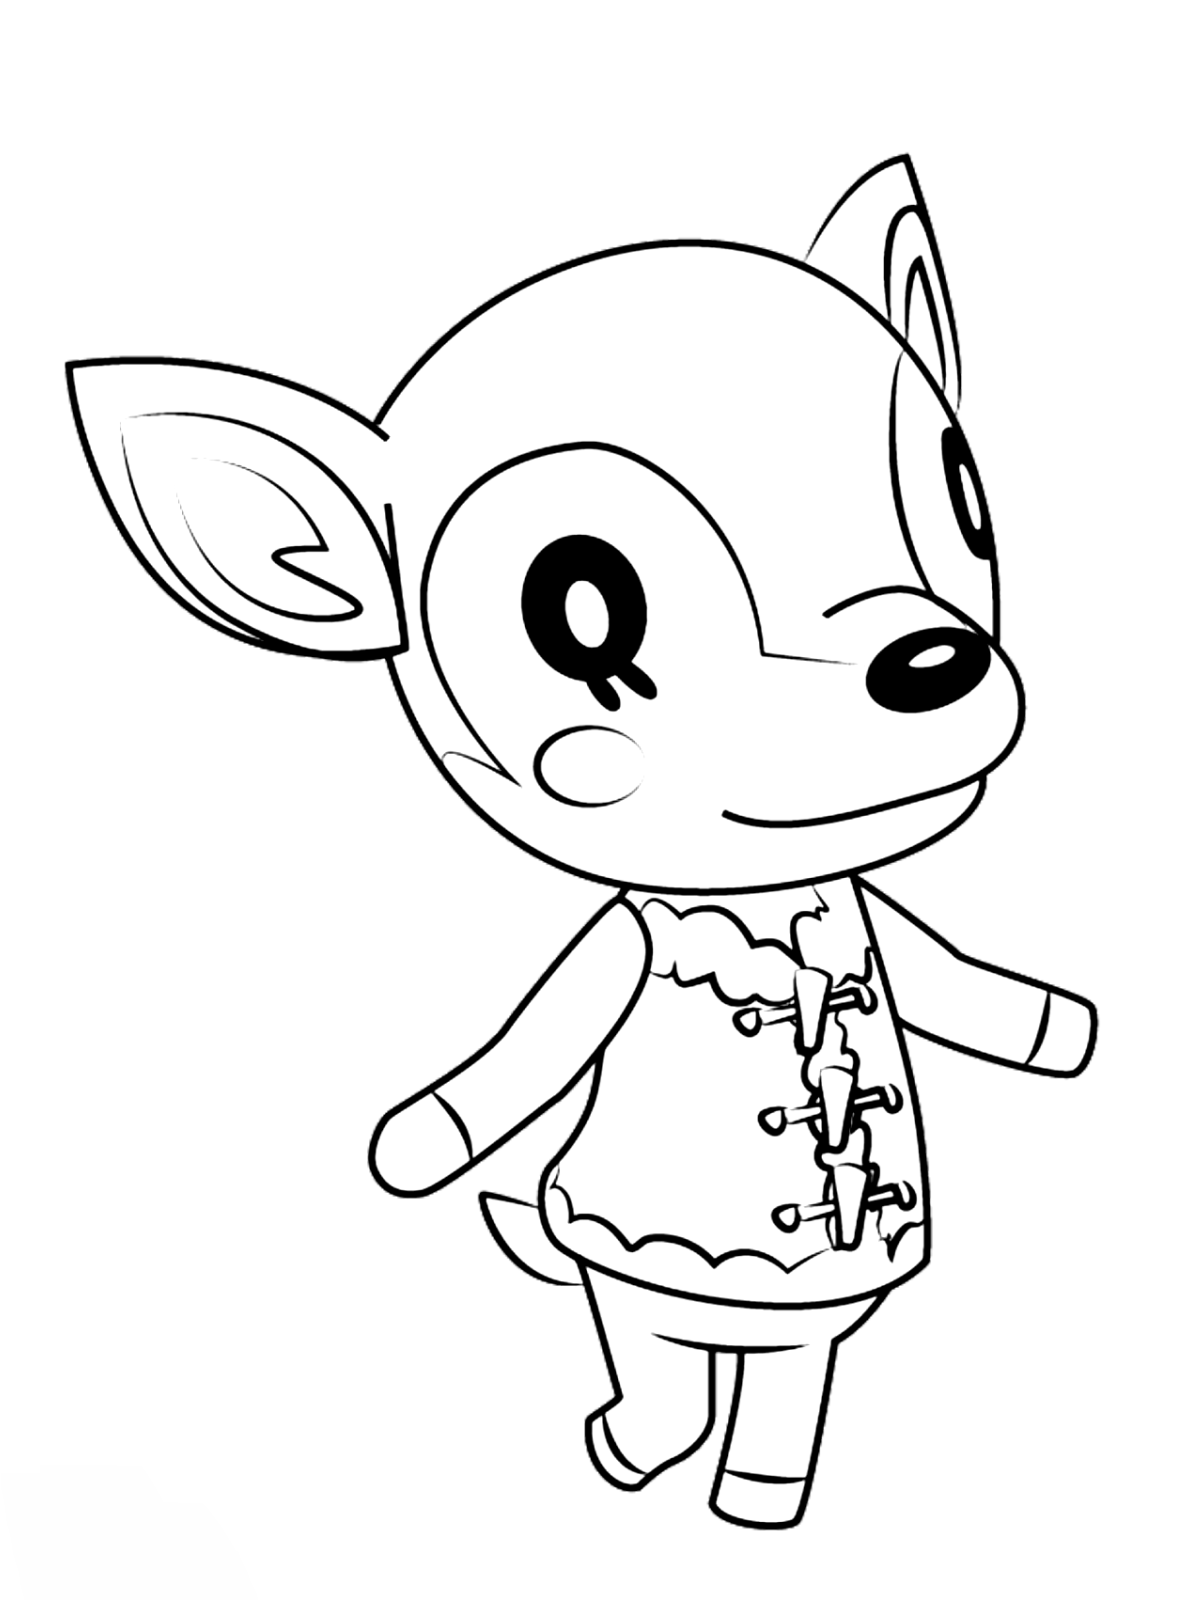 Fauna deer Coloring Pages